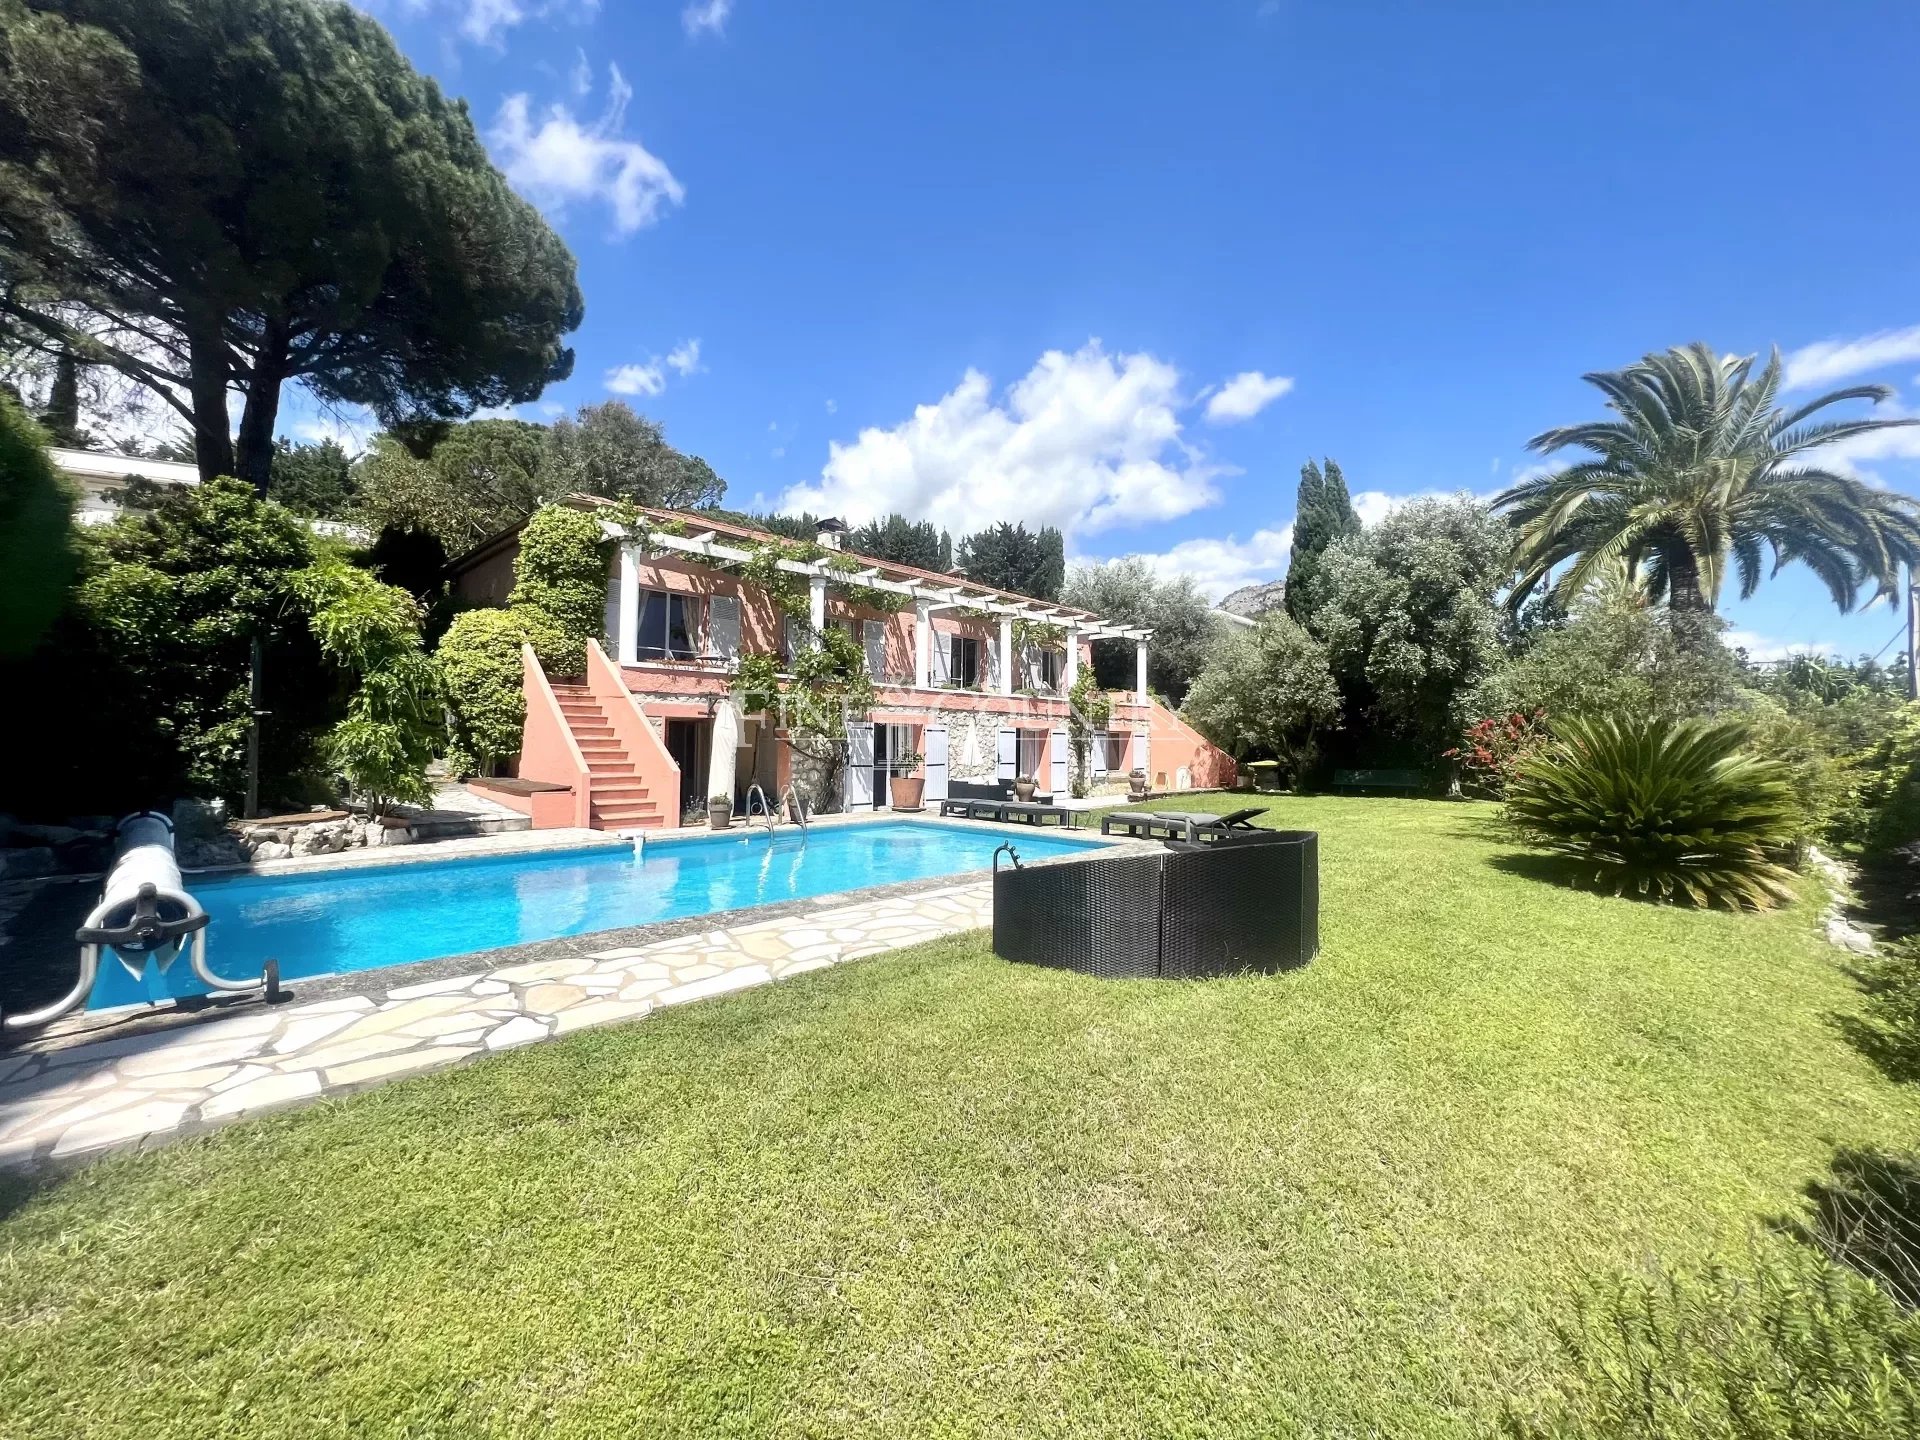 Villa for sale close to Vence with heated pool